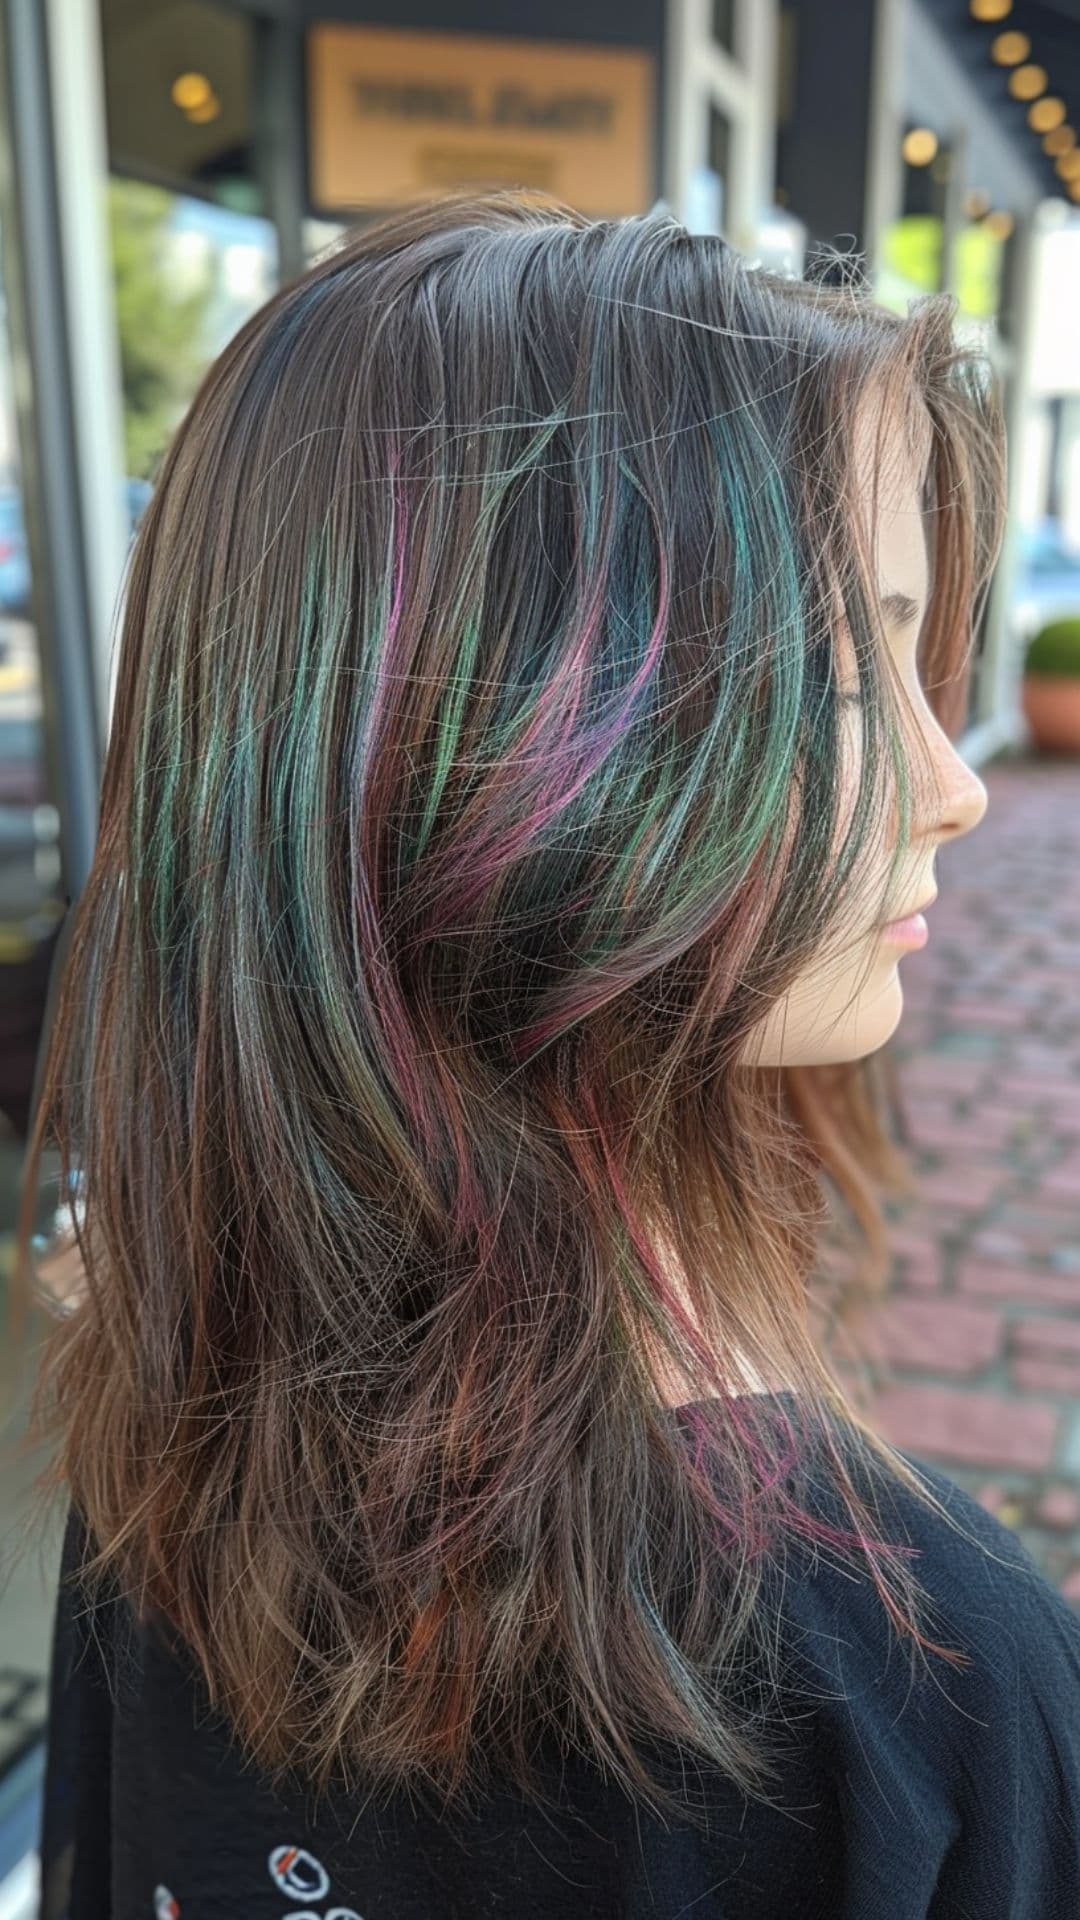 A young woman modelling an oil slick hair.